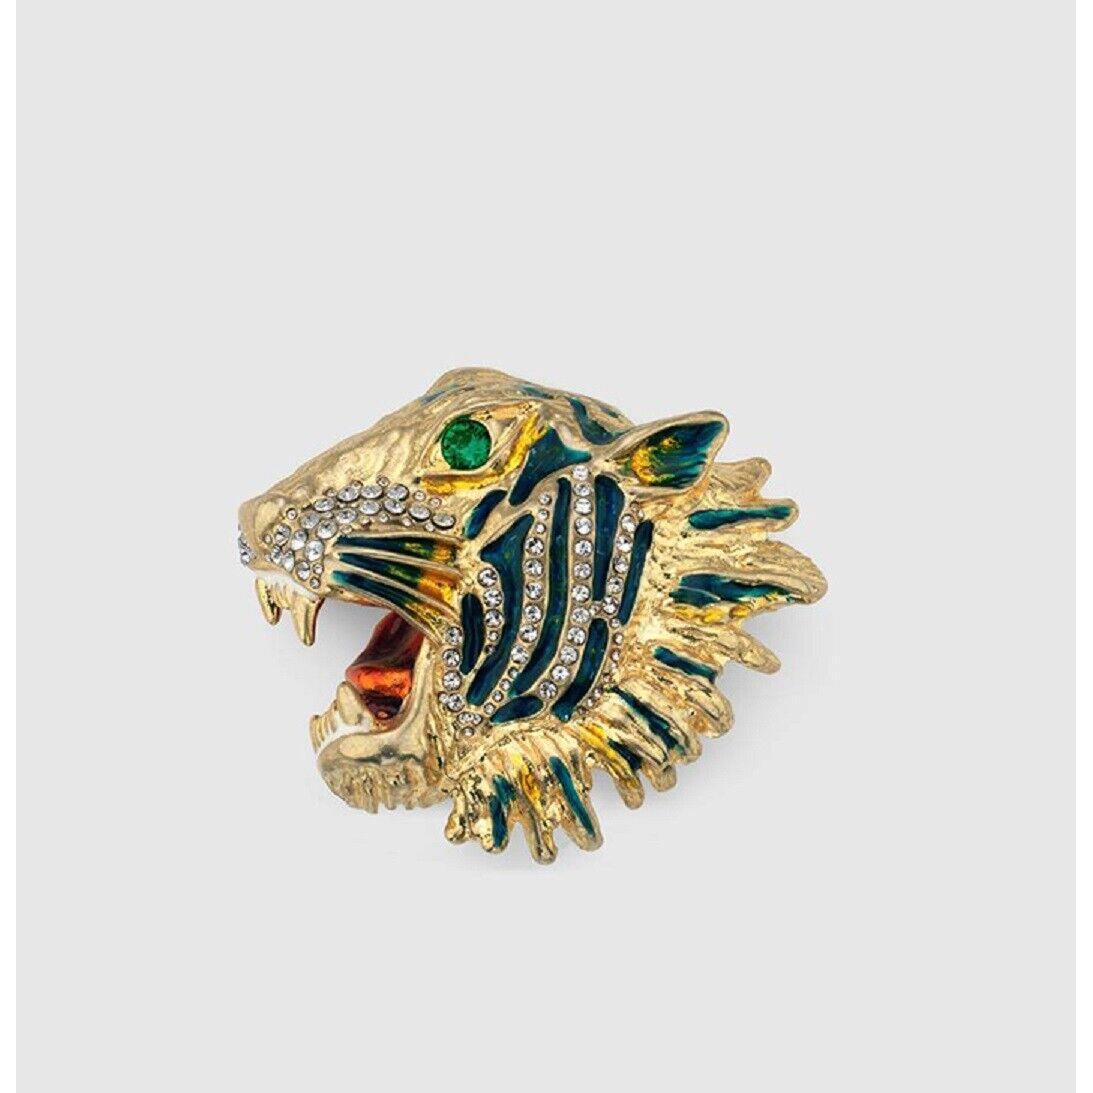 Gucci Women`s Bronze Rajah Tiger Head Ring with Crystals S 539159 8488